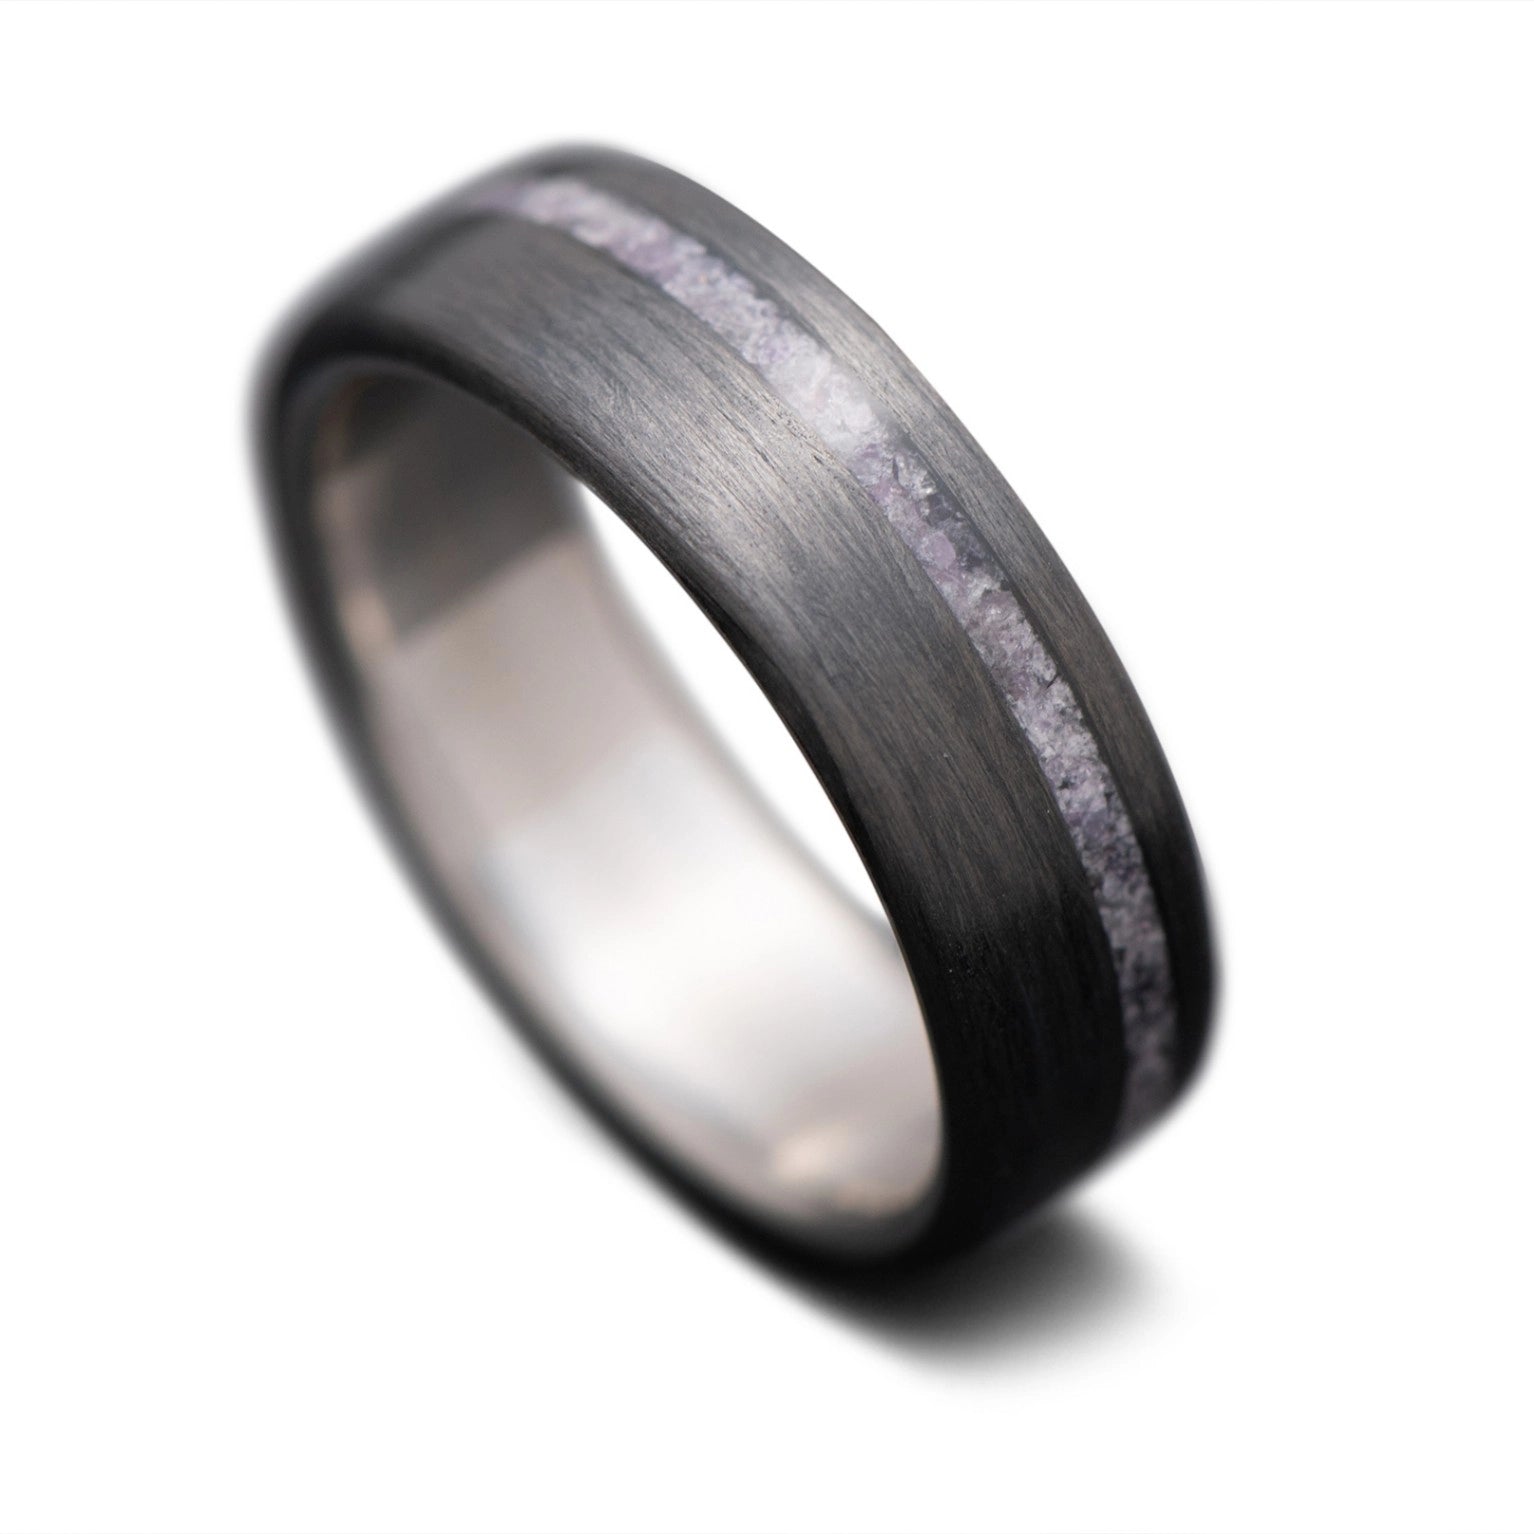  CarbonUni Core ring with  Charoite inlay and  Titanium inner sleeve, 7mm -THE VERTEX